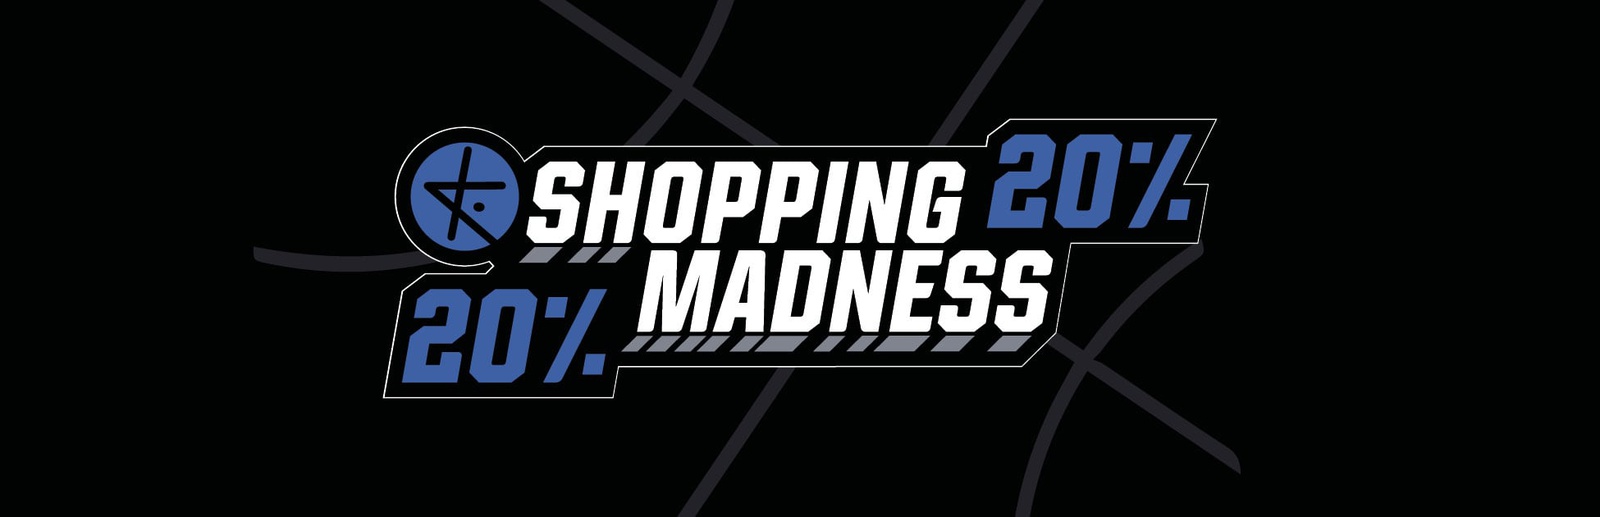 SHOPPING MADNESS - 20% OFF